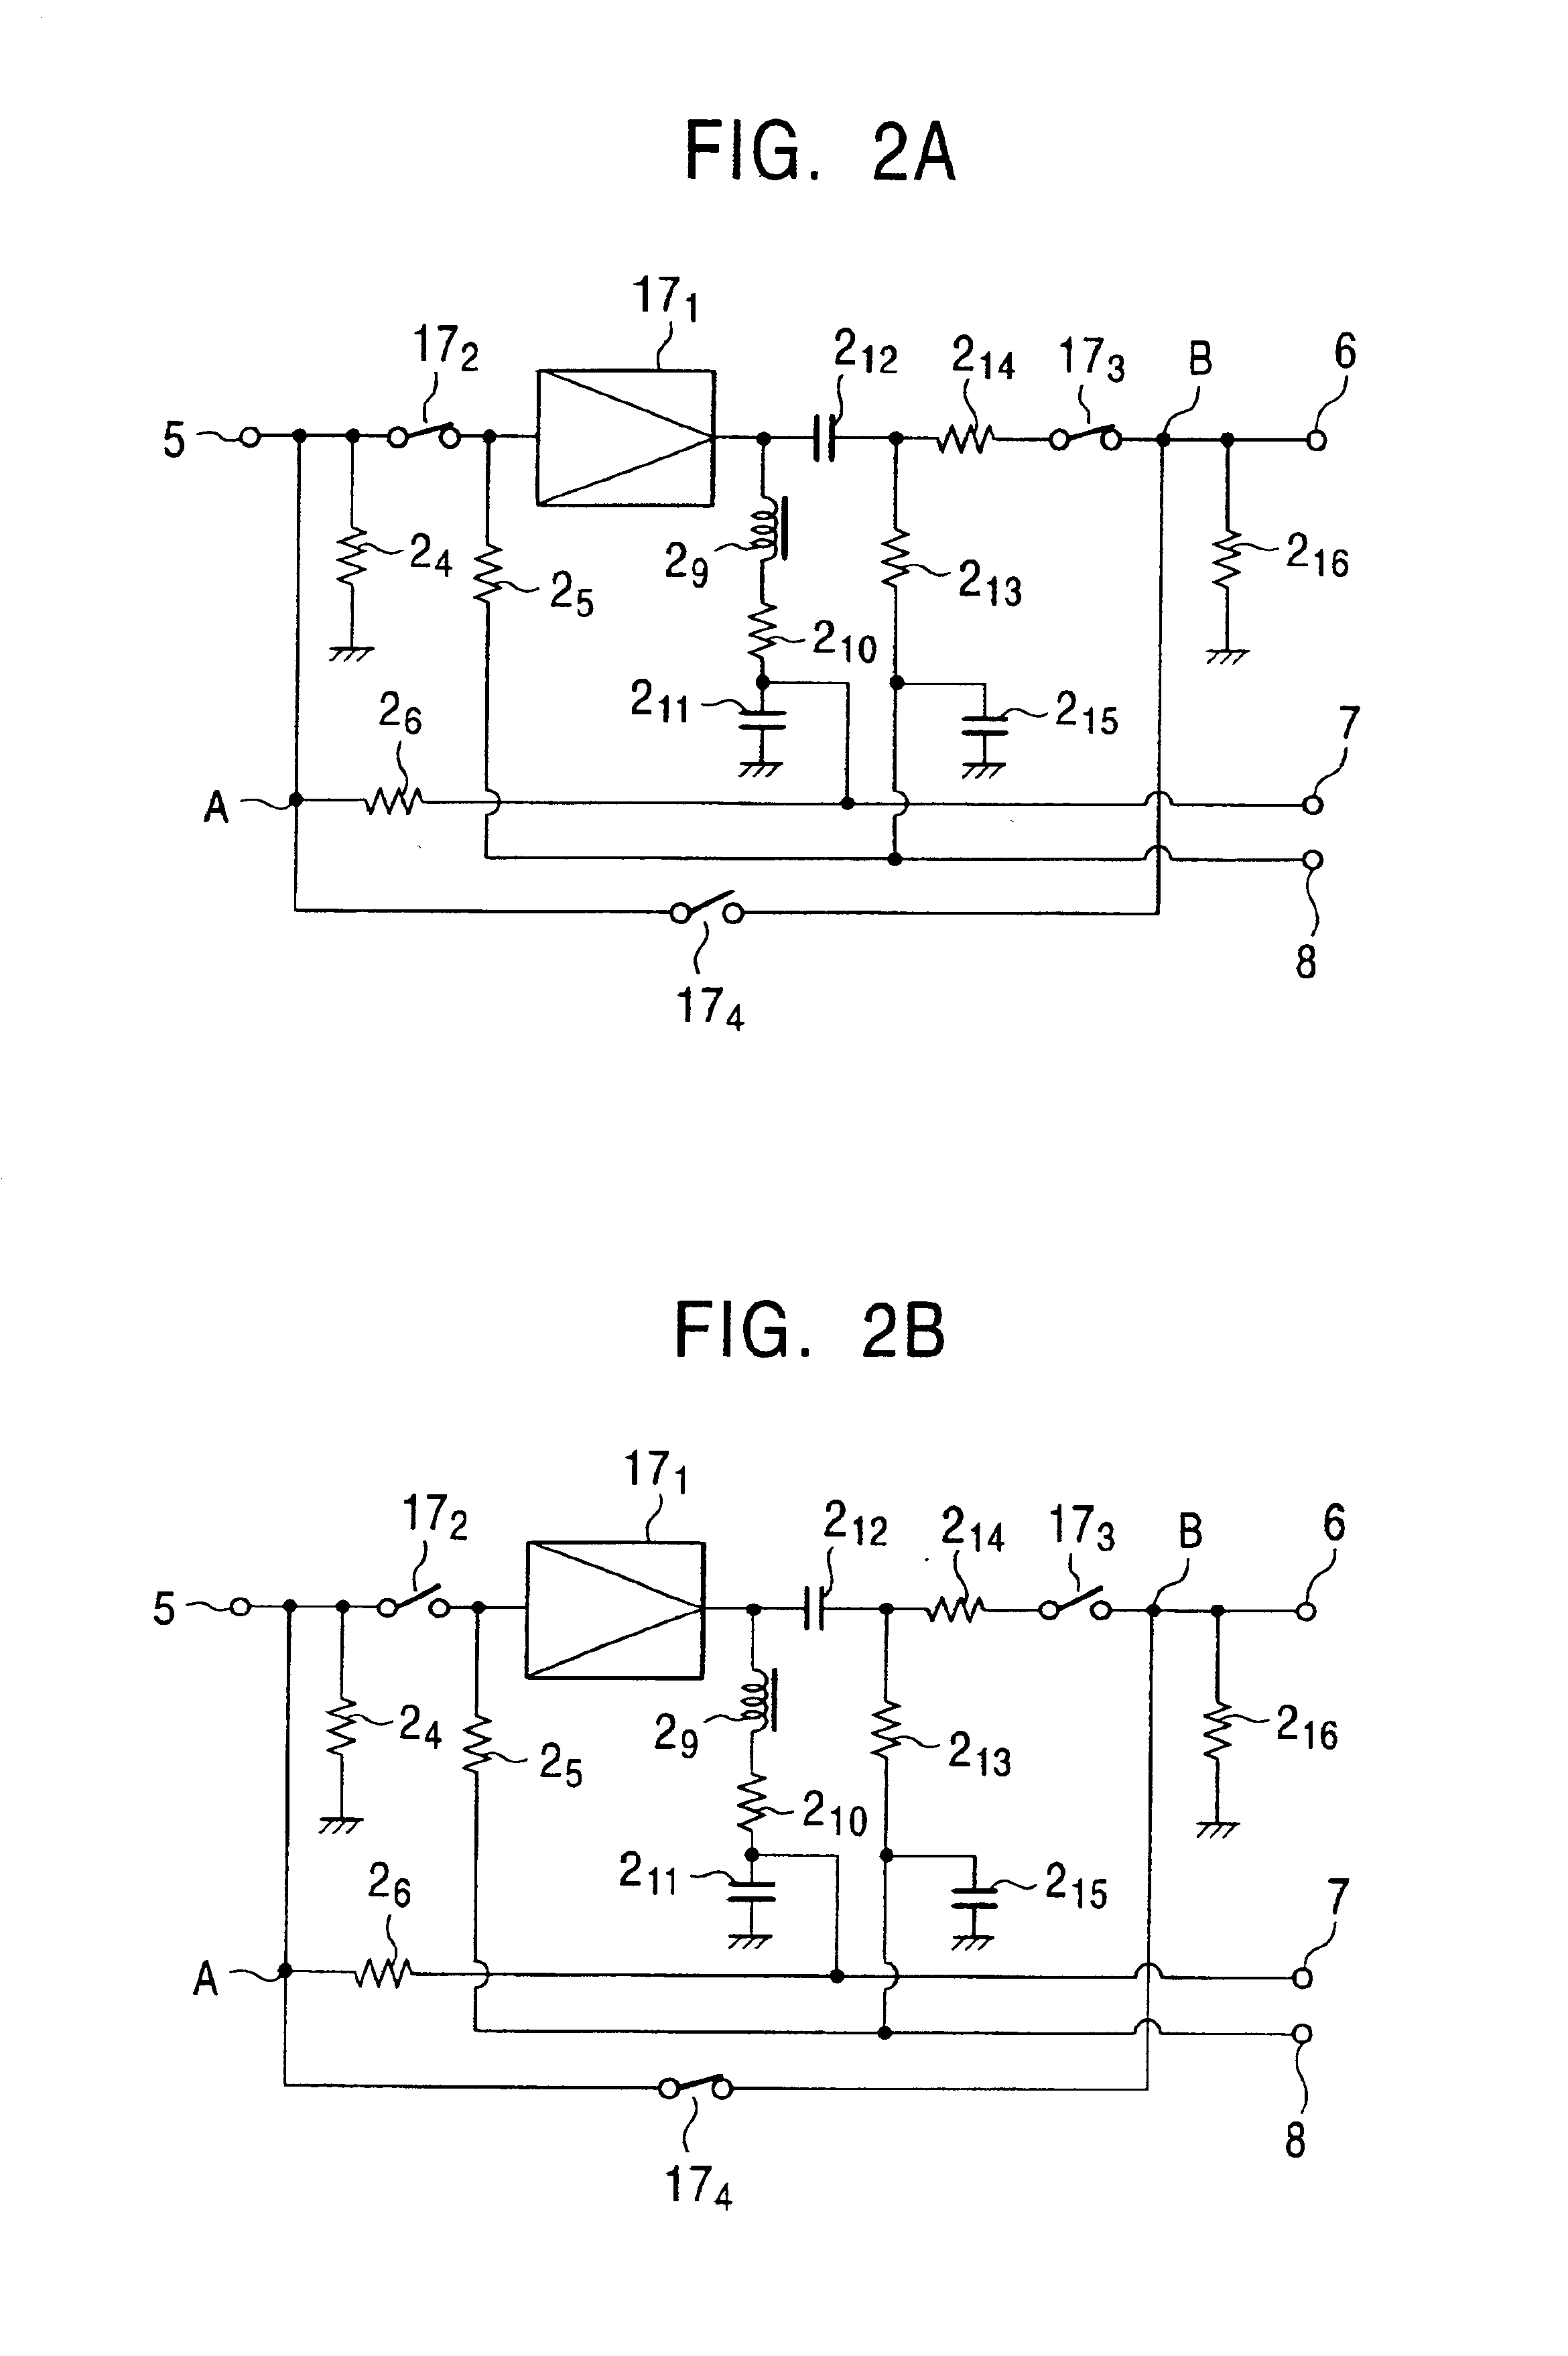 High-frequency-signal switching circuit suppressing high-frequency-signal distortion